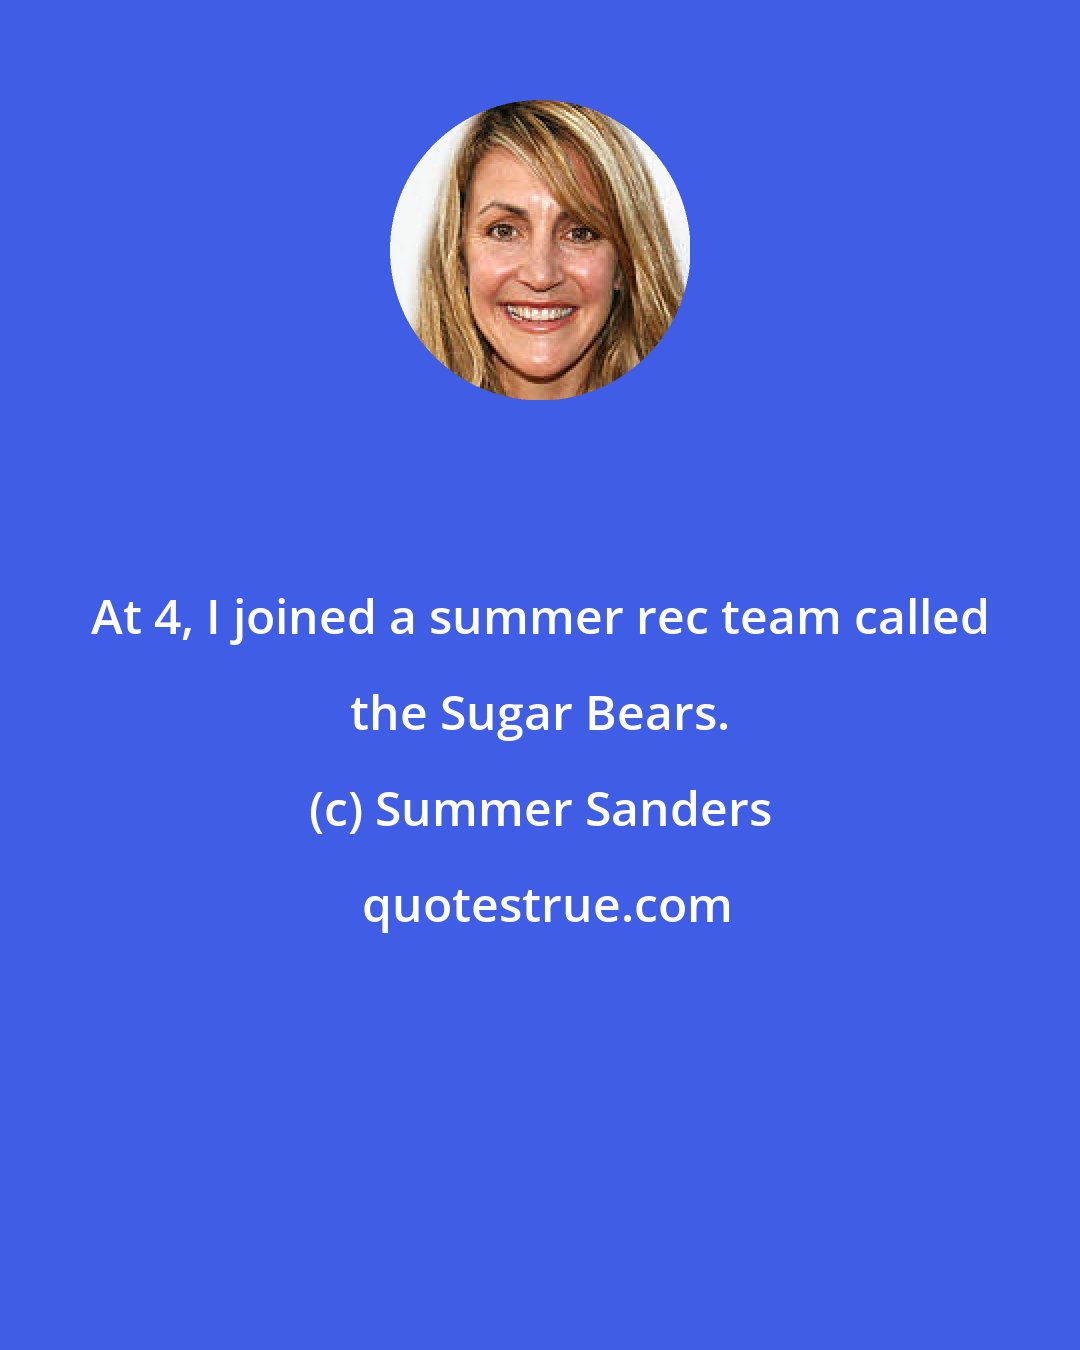 Summer Sanders: At 4, I joined a summer rec team called the Sugar Bears.